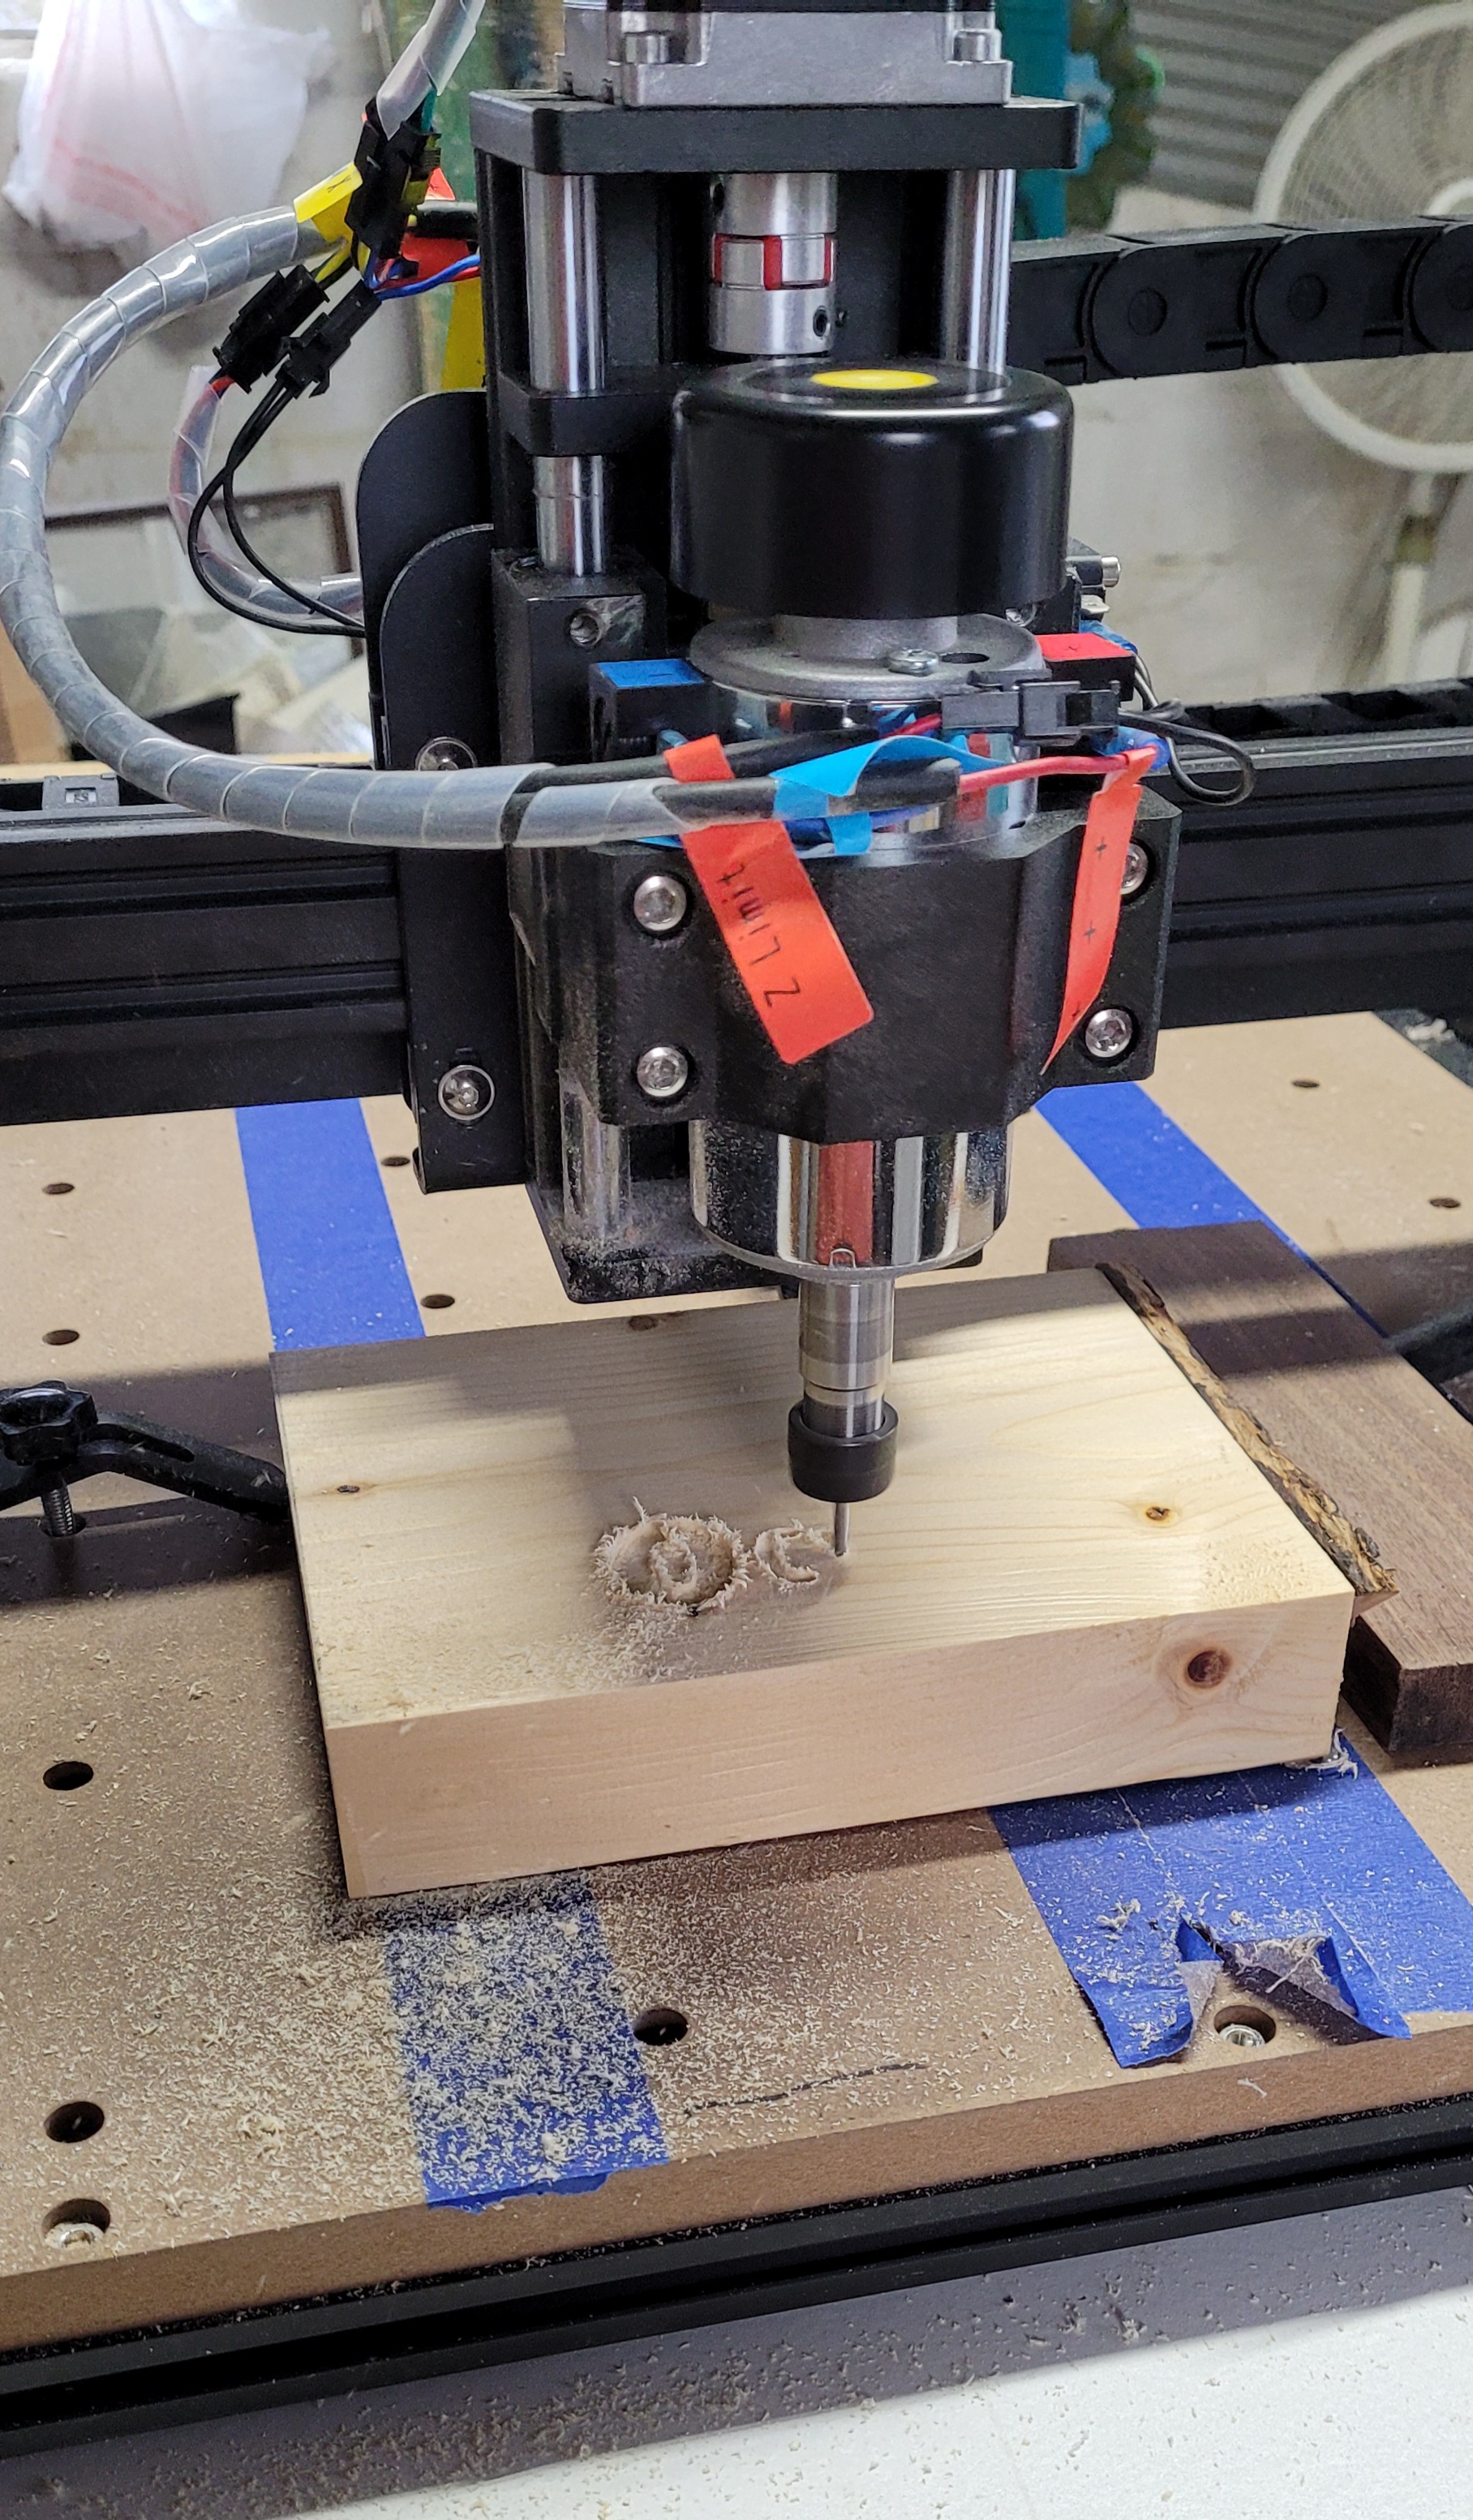 30 Days with my CNC